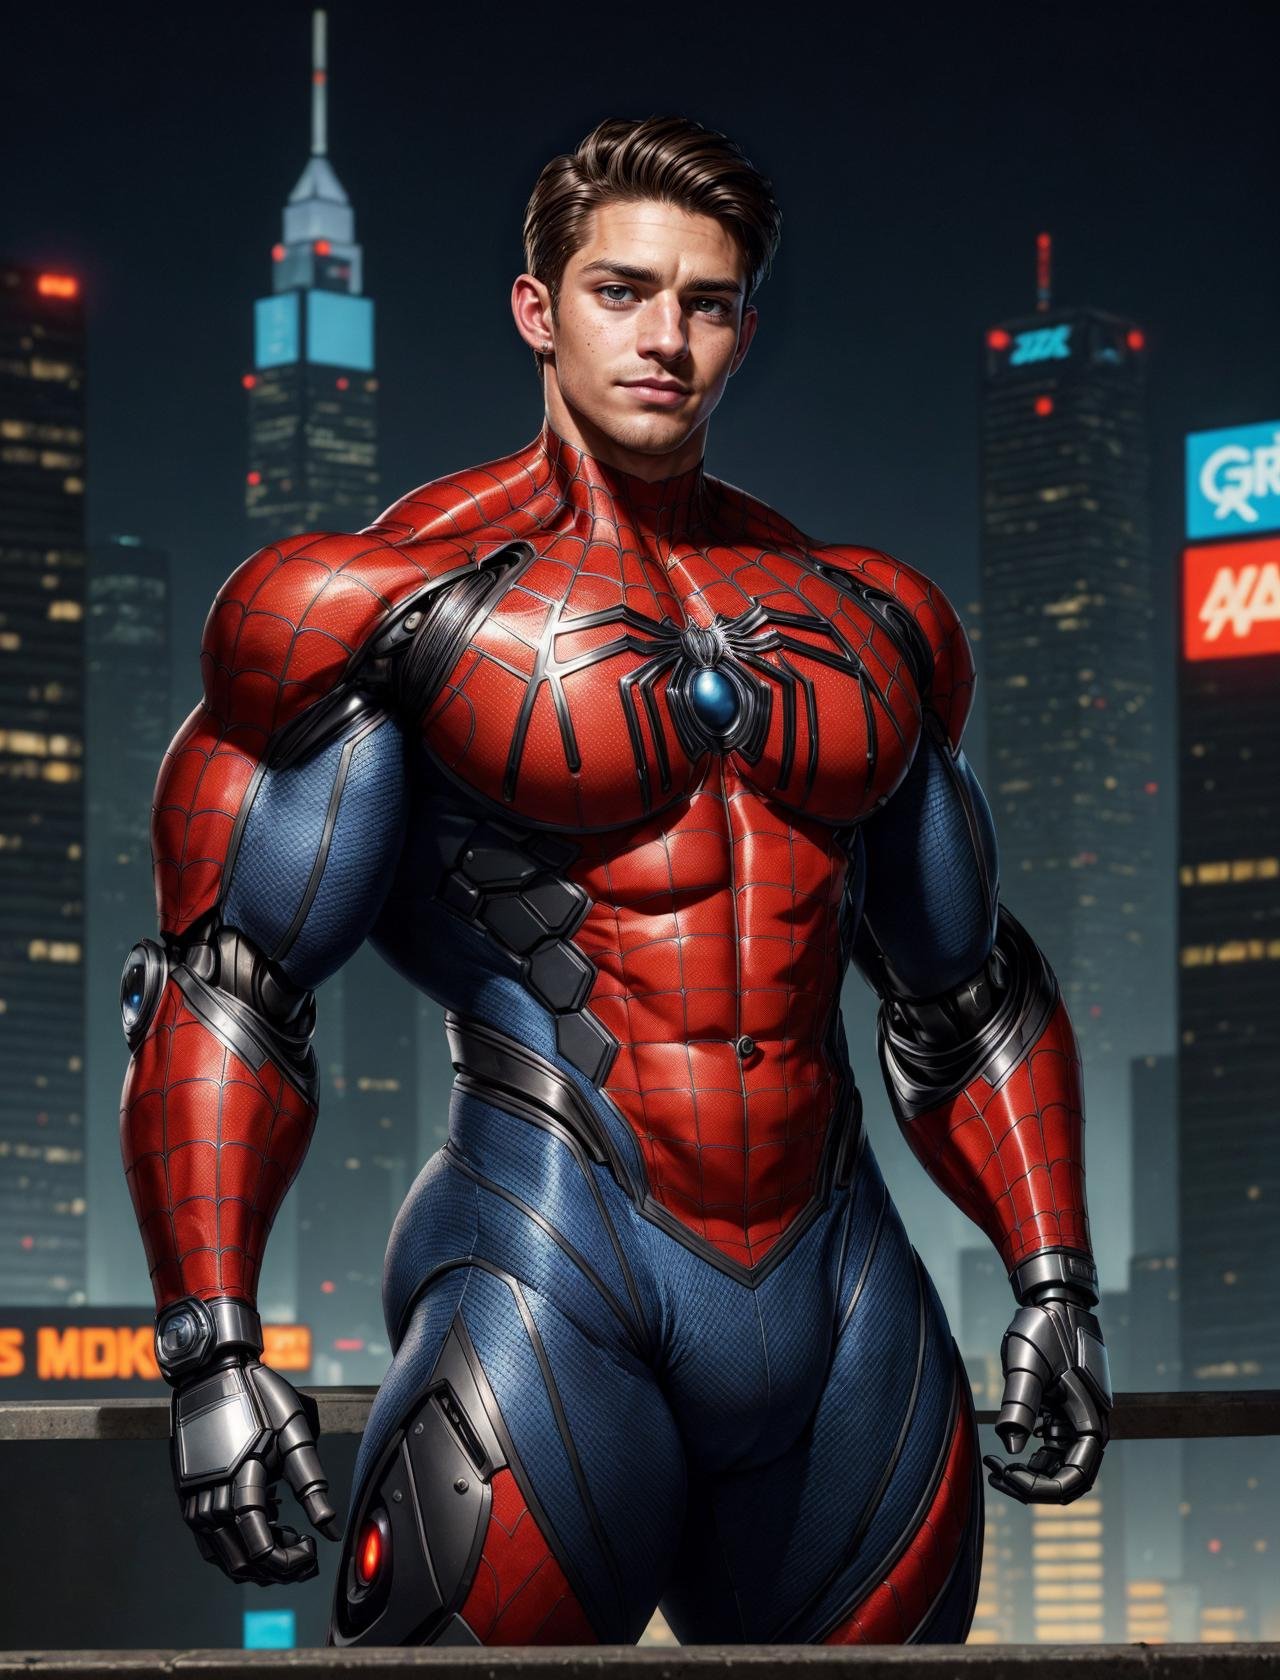 (GS-Masculine:1), (1boy), close up shot, Very detailed young handsome face, heroic, detailed realistic open eyes, (massive bodybuilder:1.5), vascular, wide shoulders, short midsection, detailed hands, tan glowing skin, freckles, depth of field, dynamic angles, (spiderman), tom holland, andrew garfield, tobey maguire, (cyberpunk style:1.2), piercings, neo cyberpunk city, combat gear, police officer, (robotic arms:1.2), robotic hands, neon lights, sitting on a stoop in the city at night, sci fi world, gadgets, power cells, cybernetics, (best quality:1.2), <lora:more_details:0.5>